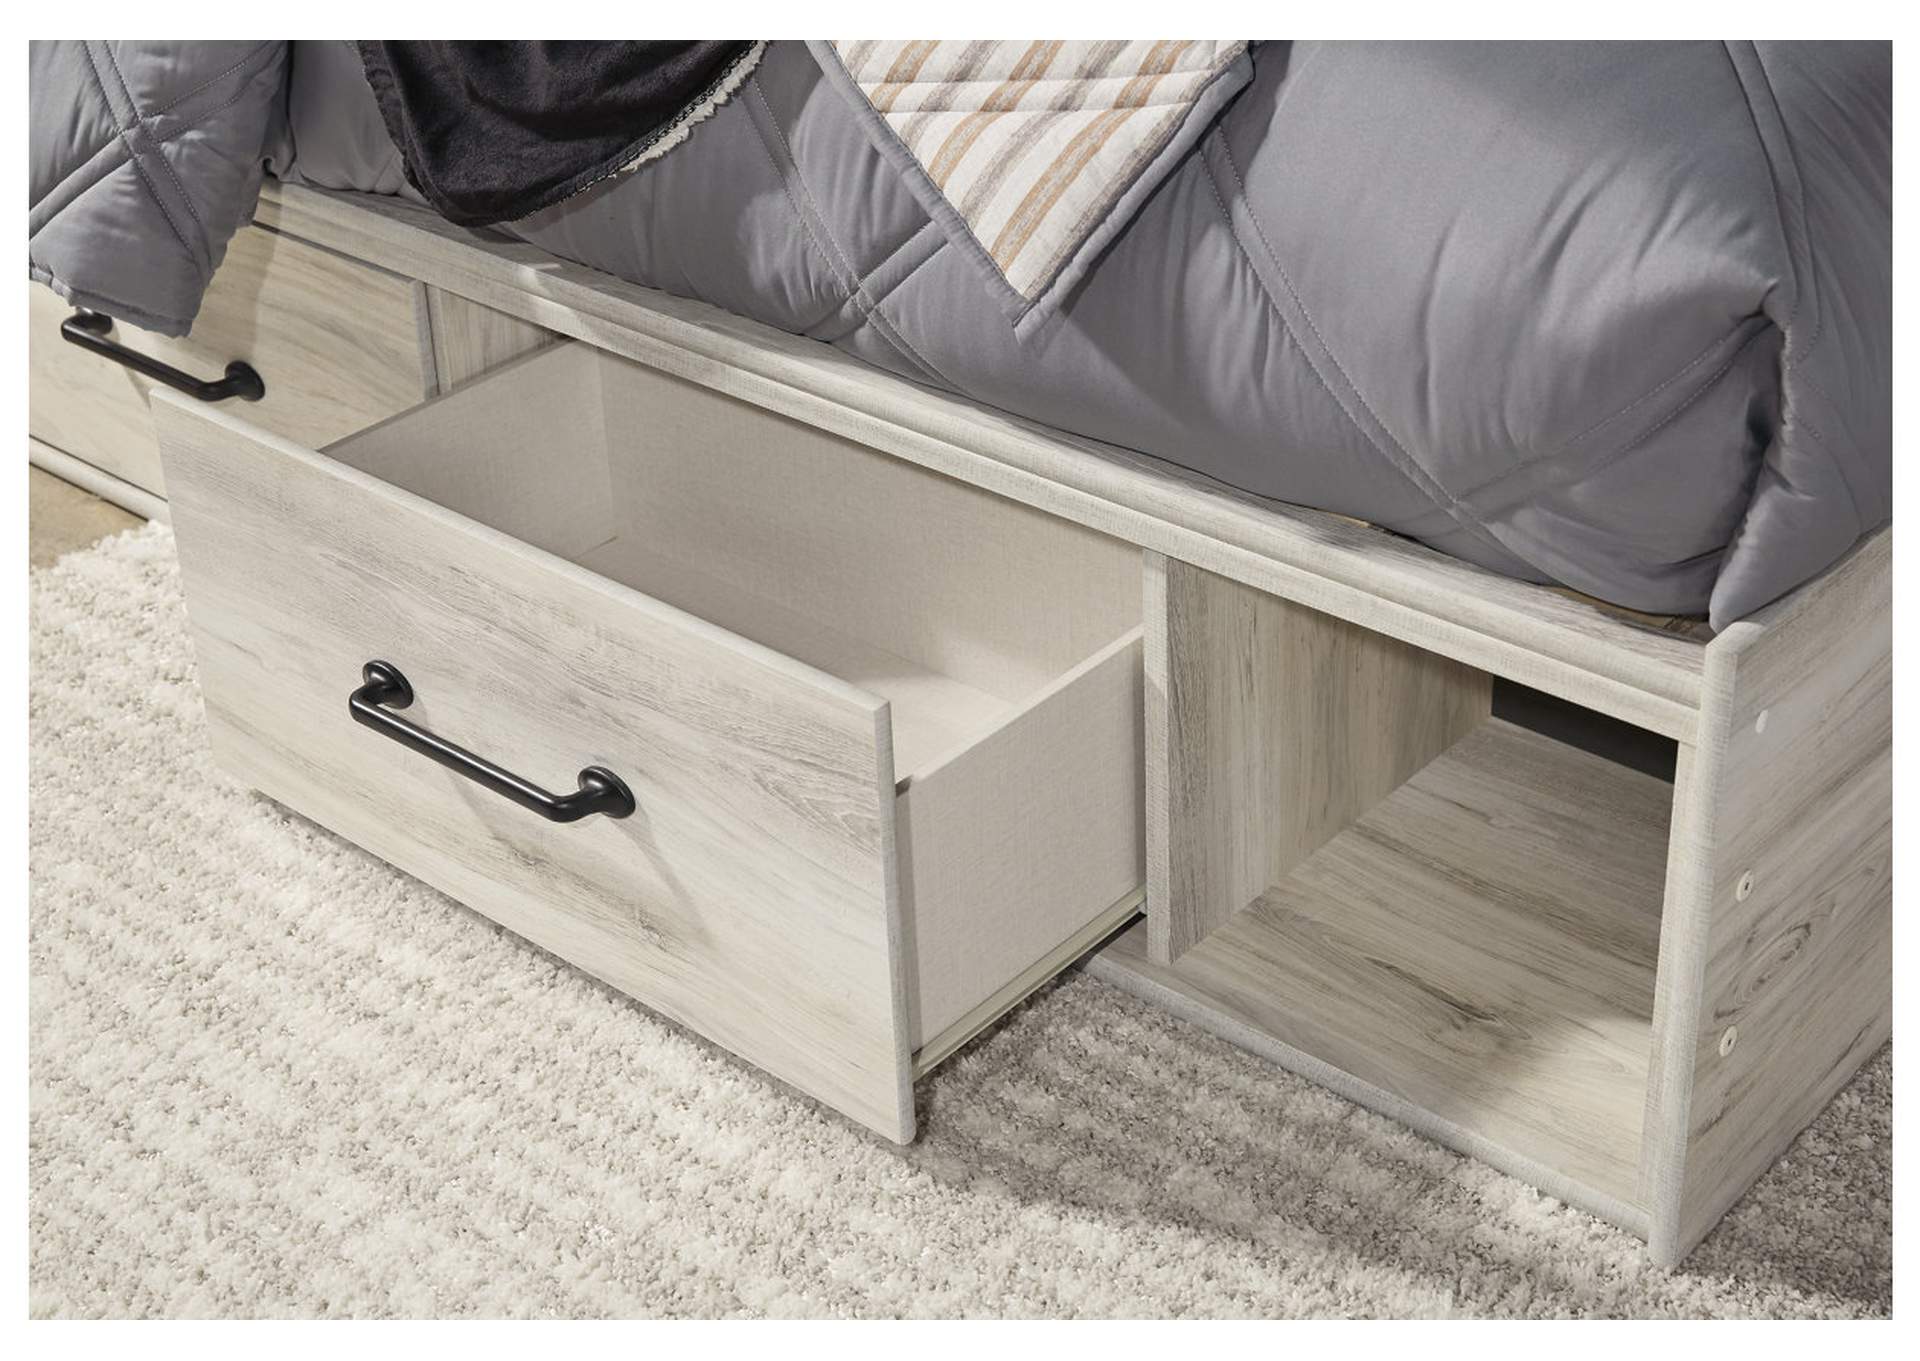 Cambeck Full Panel Bed with 4 Storage Drawers with Mirrored Dresser and 2 Nightstands,Signature Design By Ashley